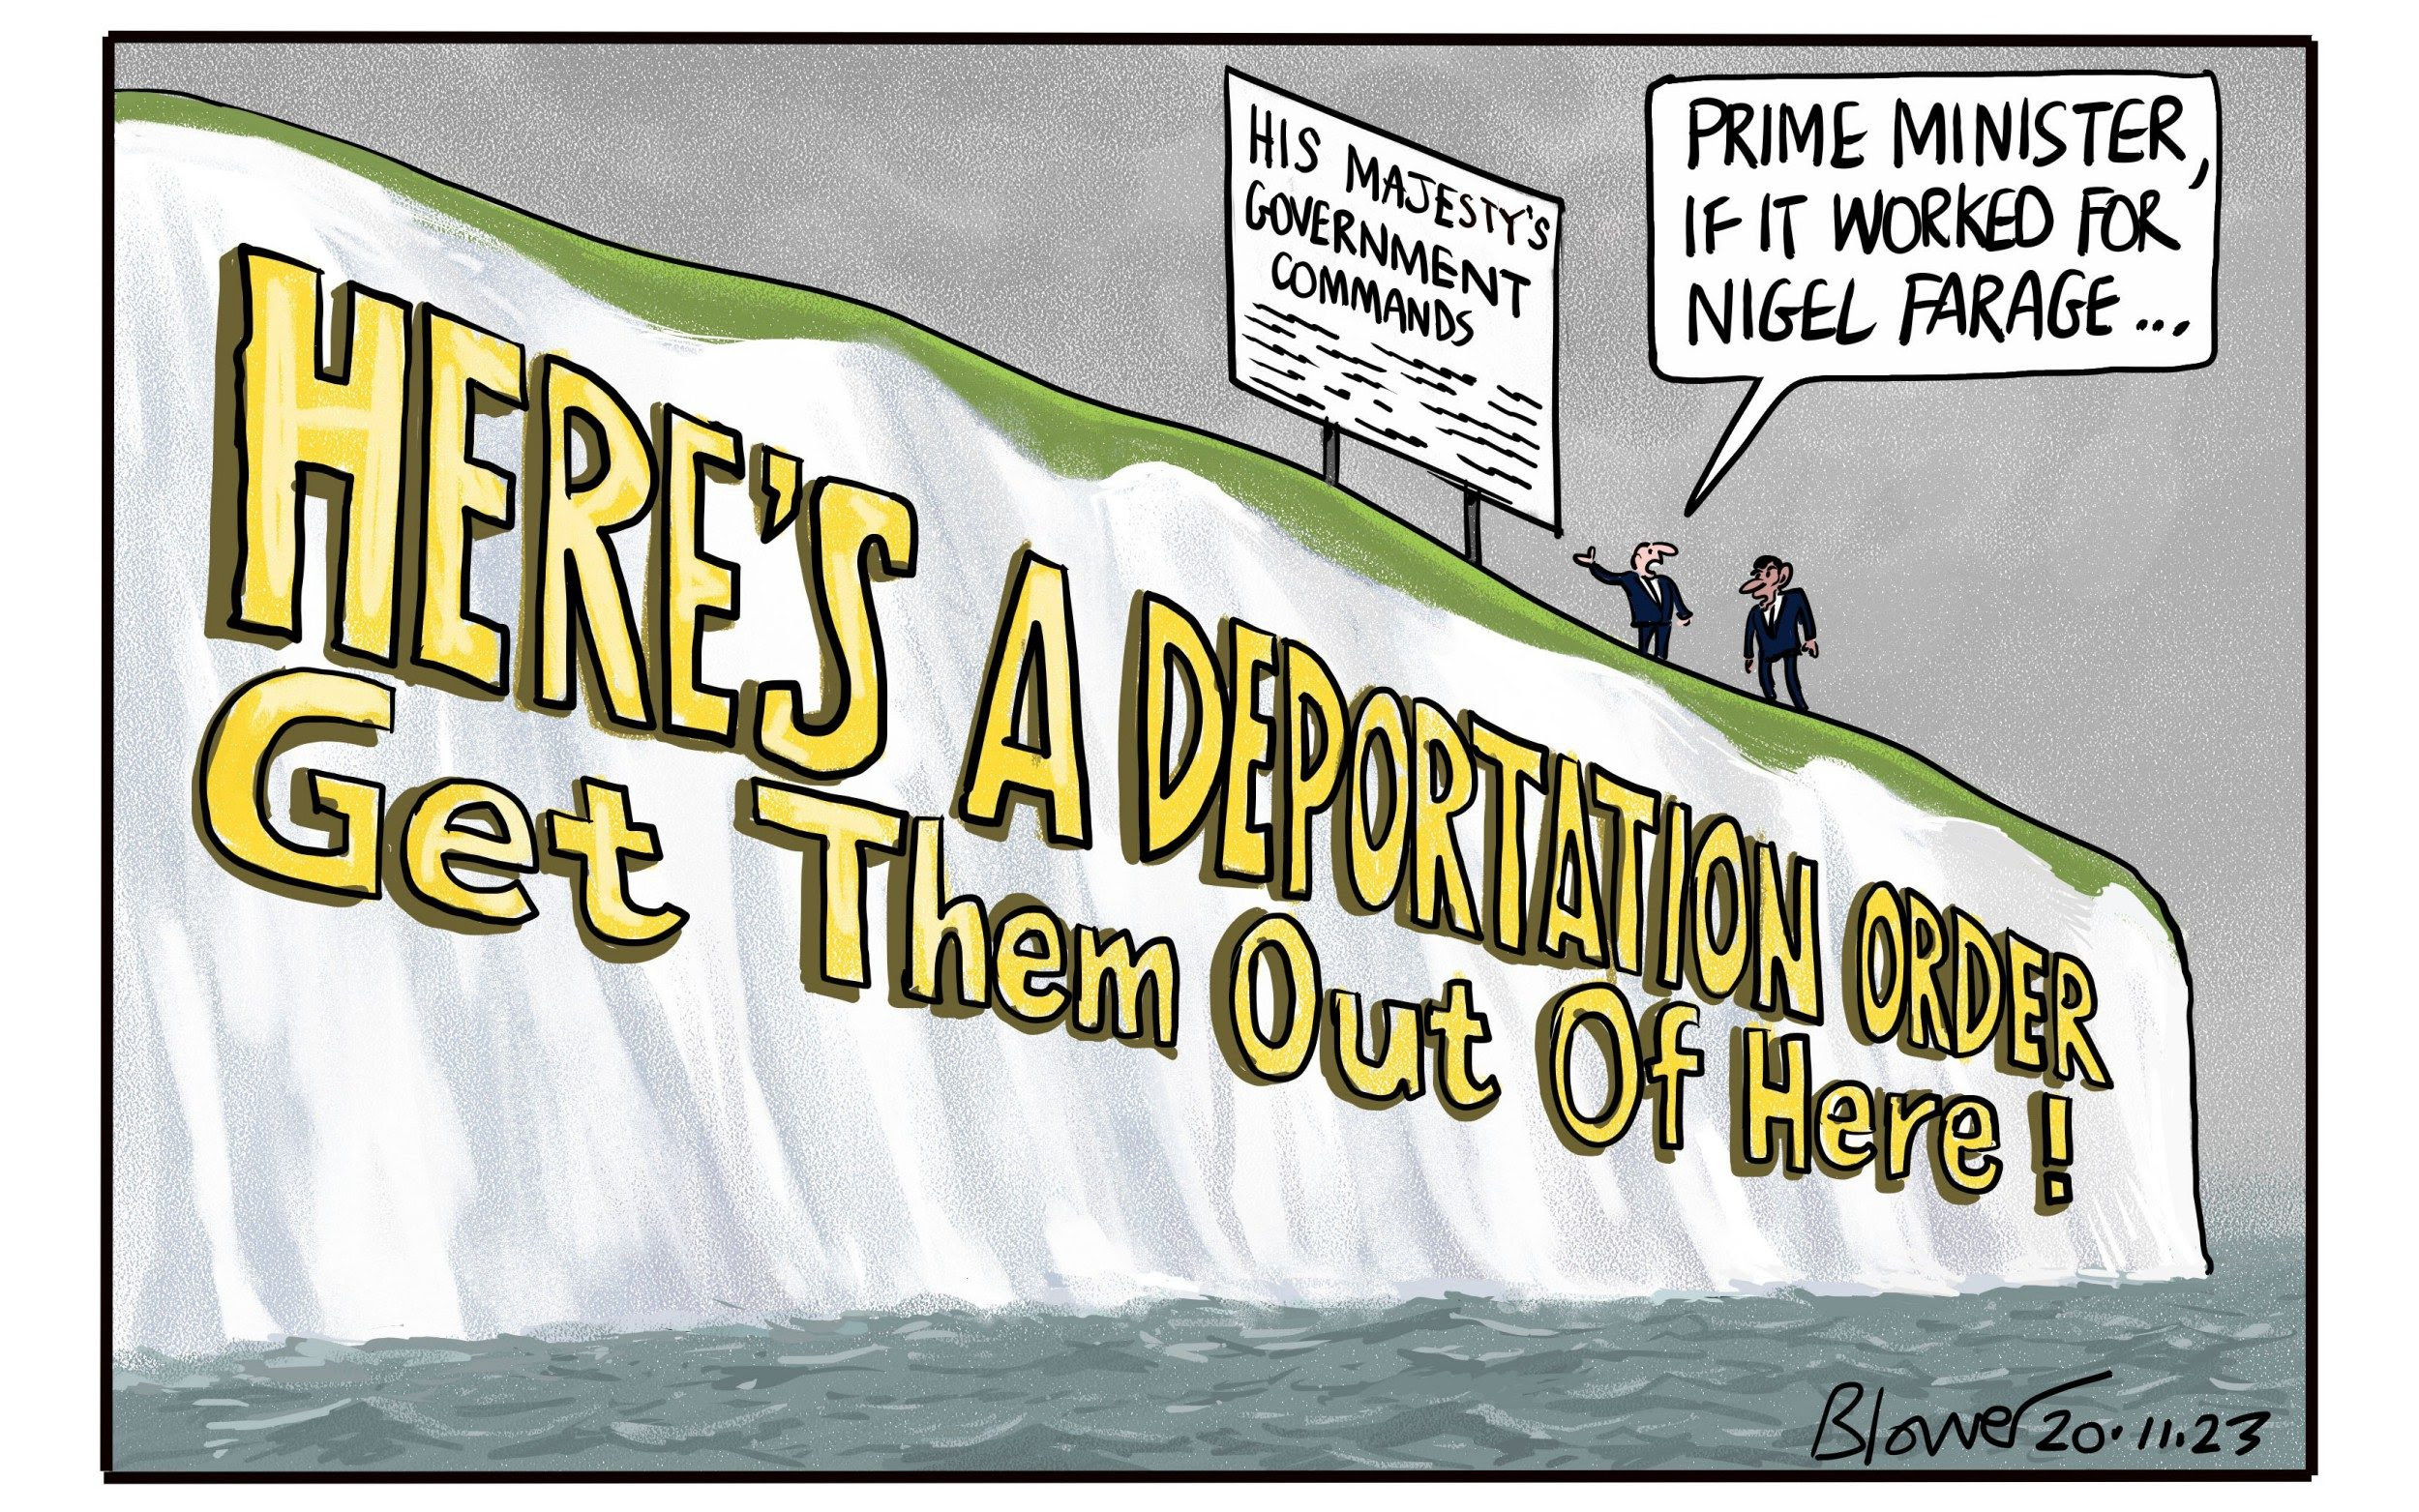 Here's a deportation order, get them out of here! is emblazoned across the cliffs of Dover. .